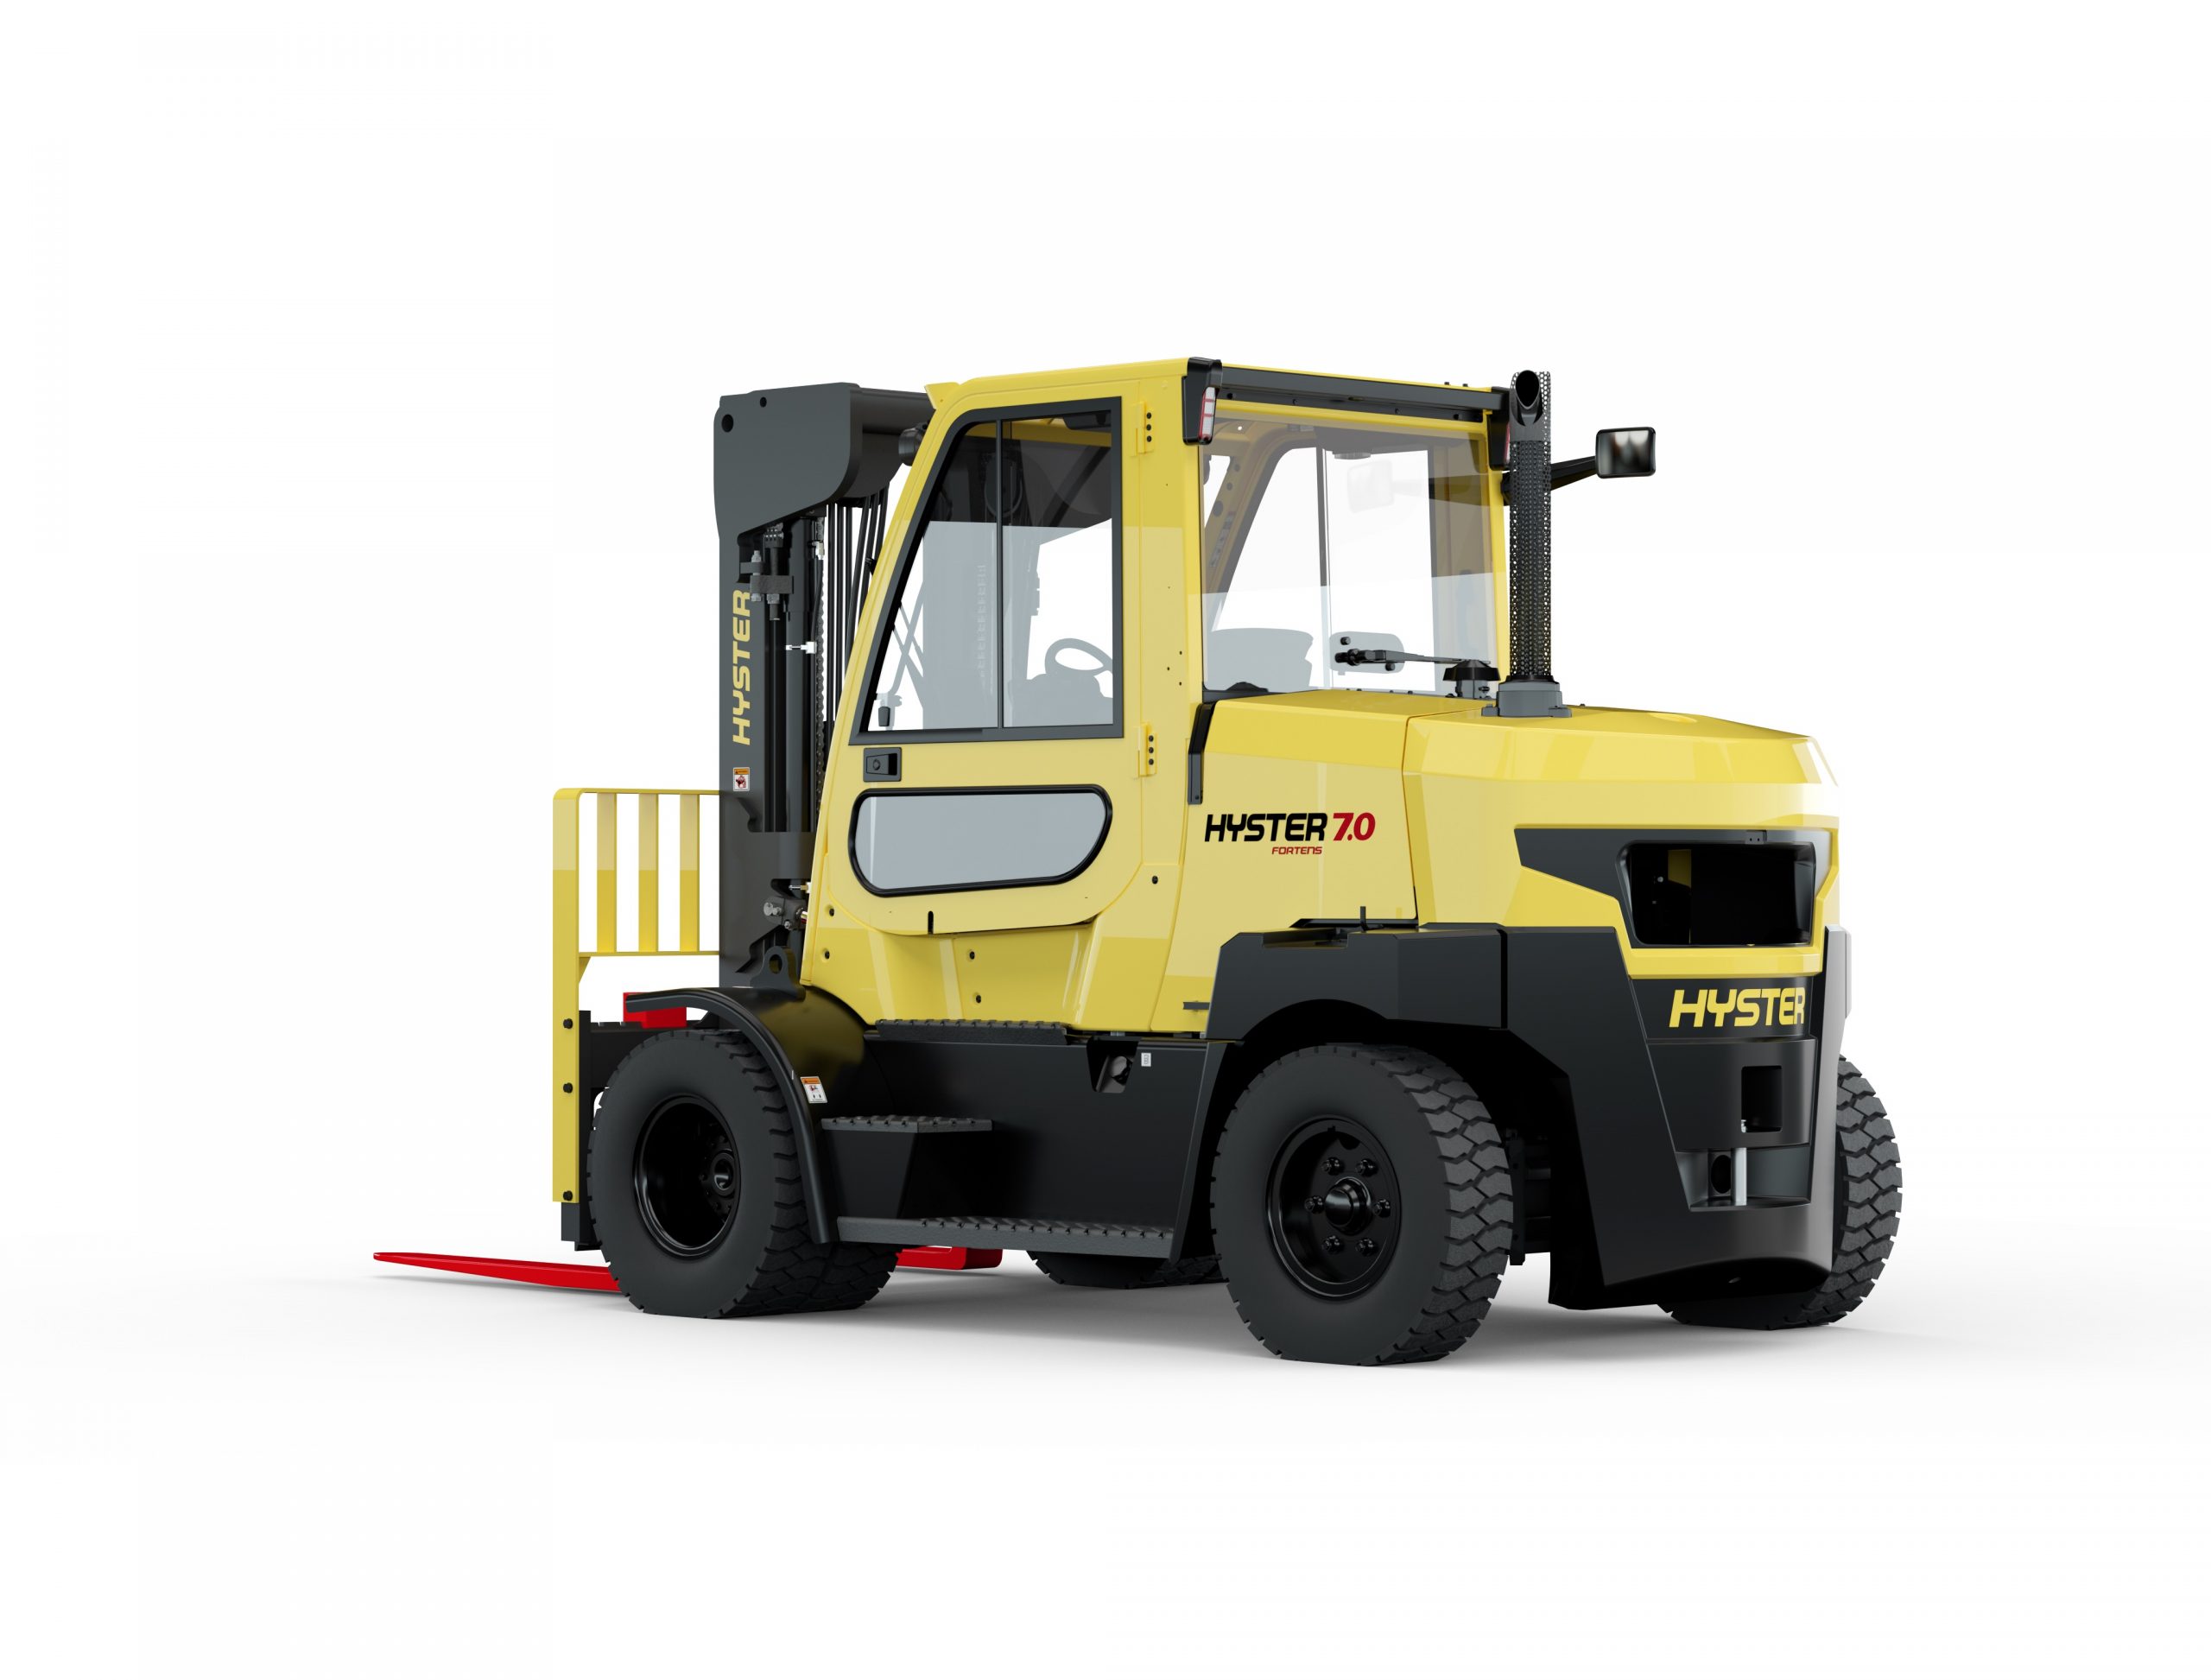 NEW SPACE SAVING HYSTER FORTENS FOR 7 AND 8 TONNE LIFTS 1 scaled 1